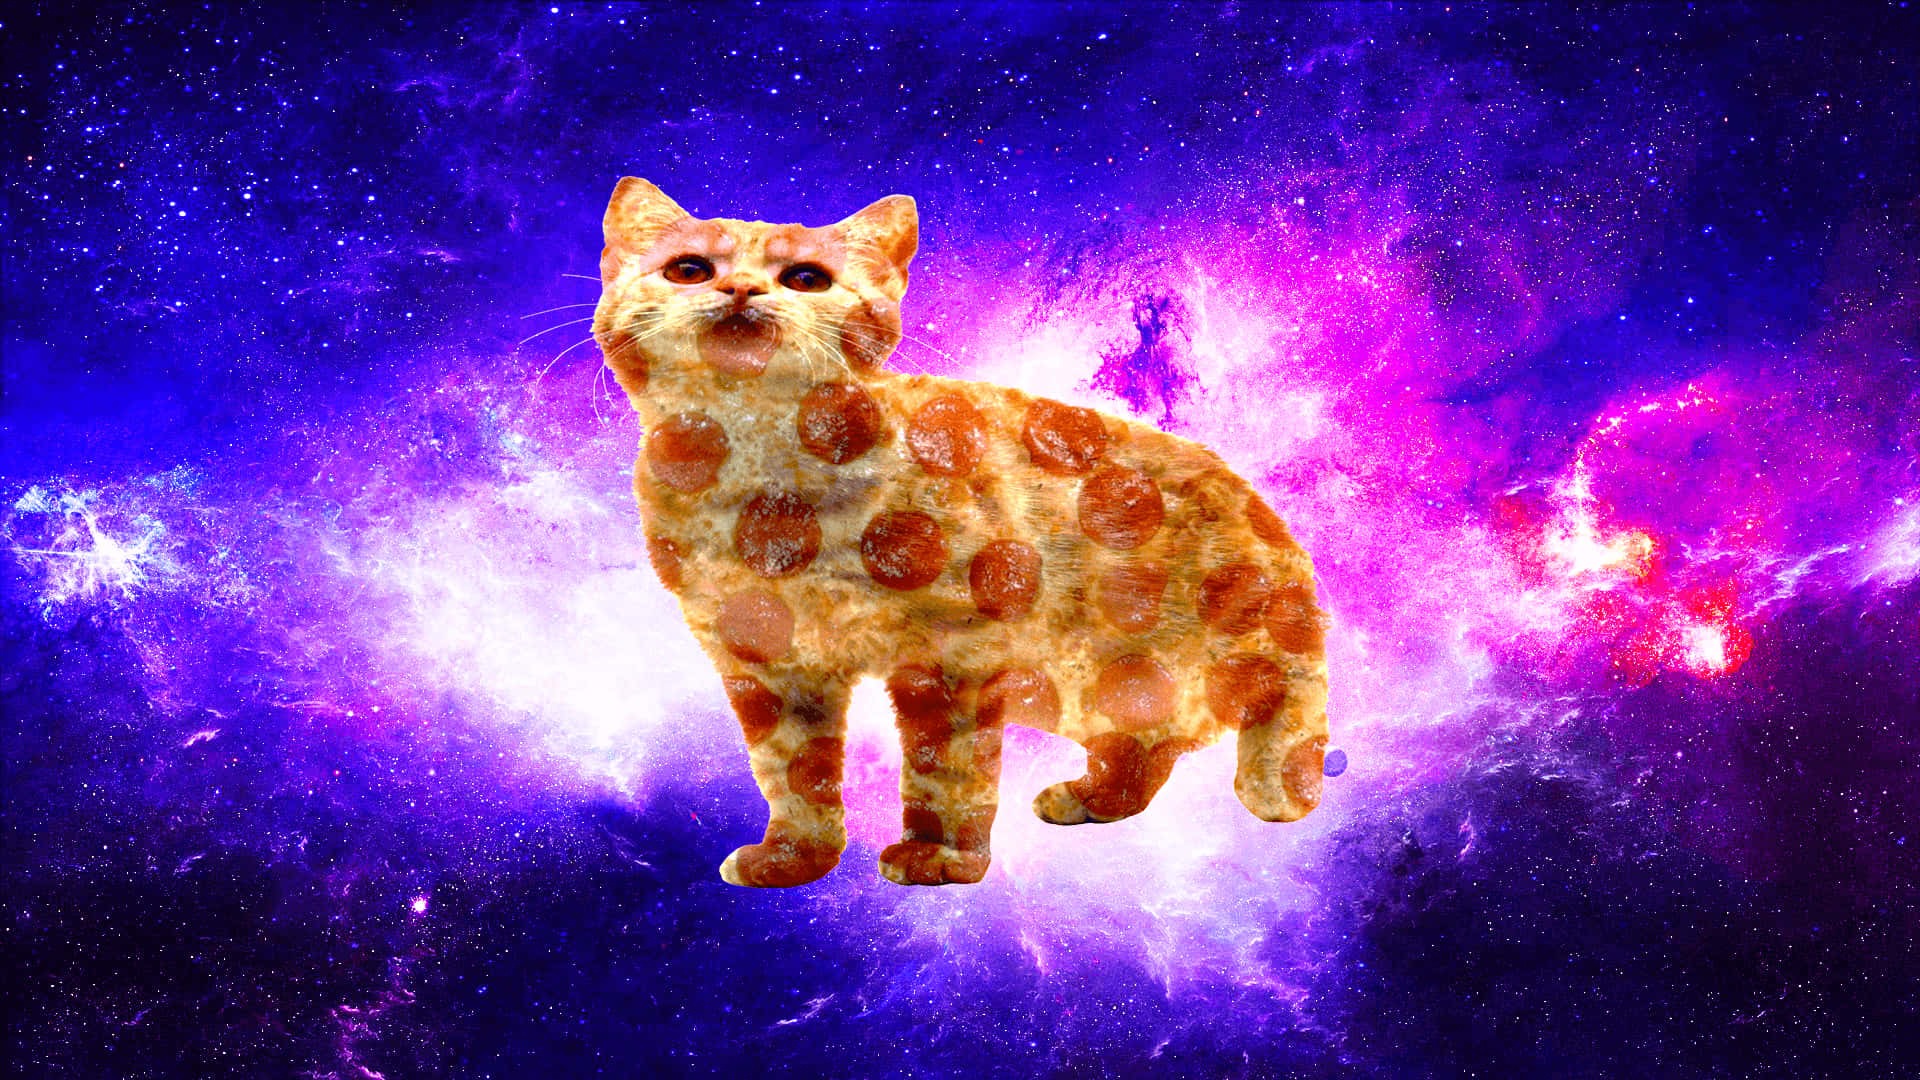 'Cats? In Space?!' Wallpaper